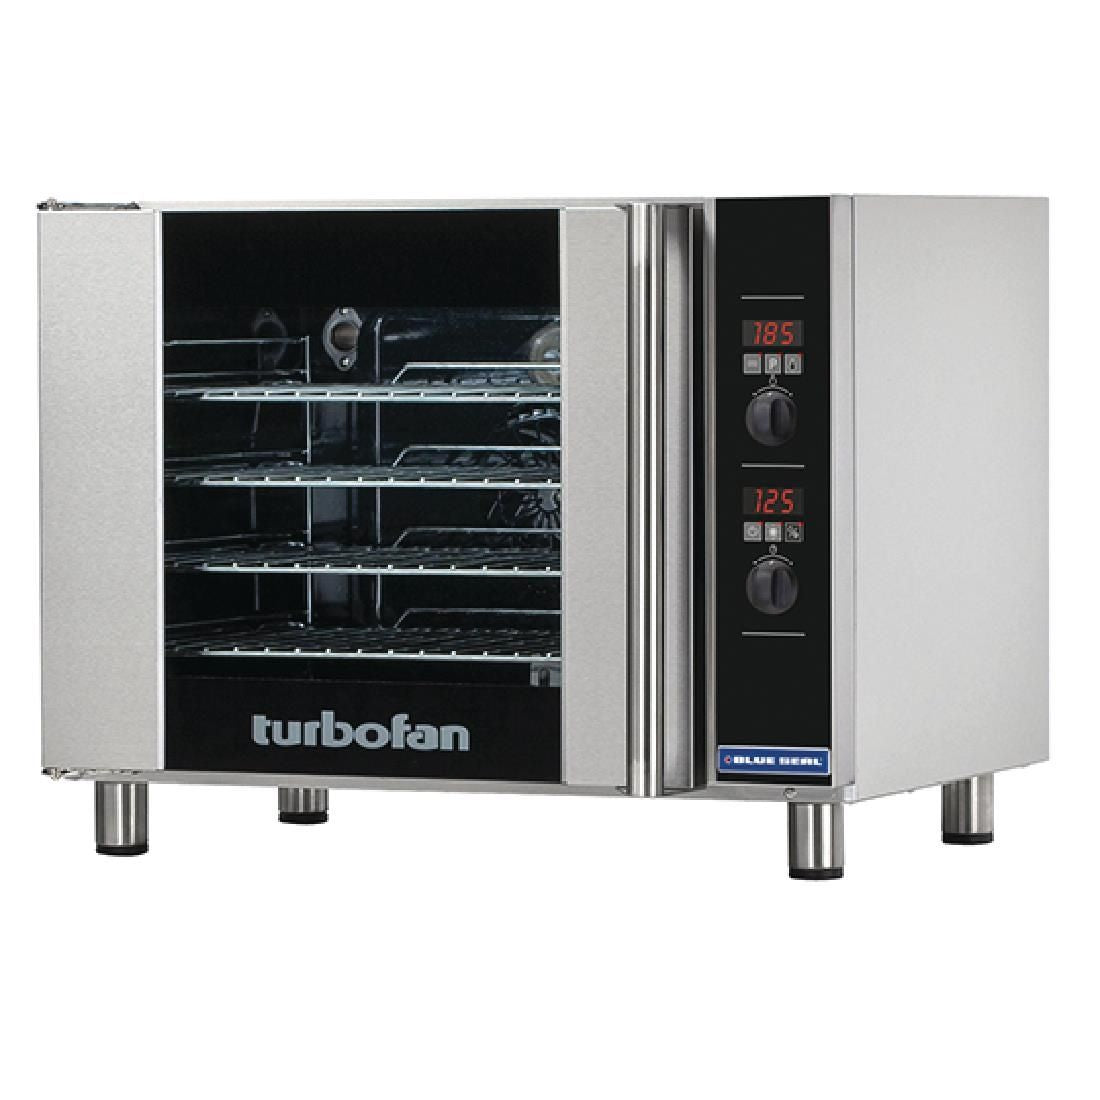 CE088 Blue Seal Turbofan Convection Oven E31D4 JD Catering Equipment Solutions Ltd